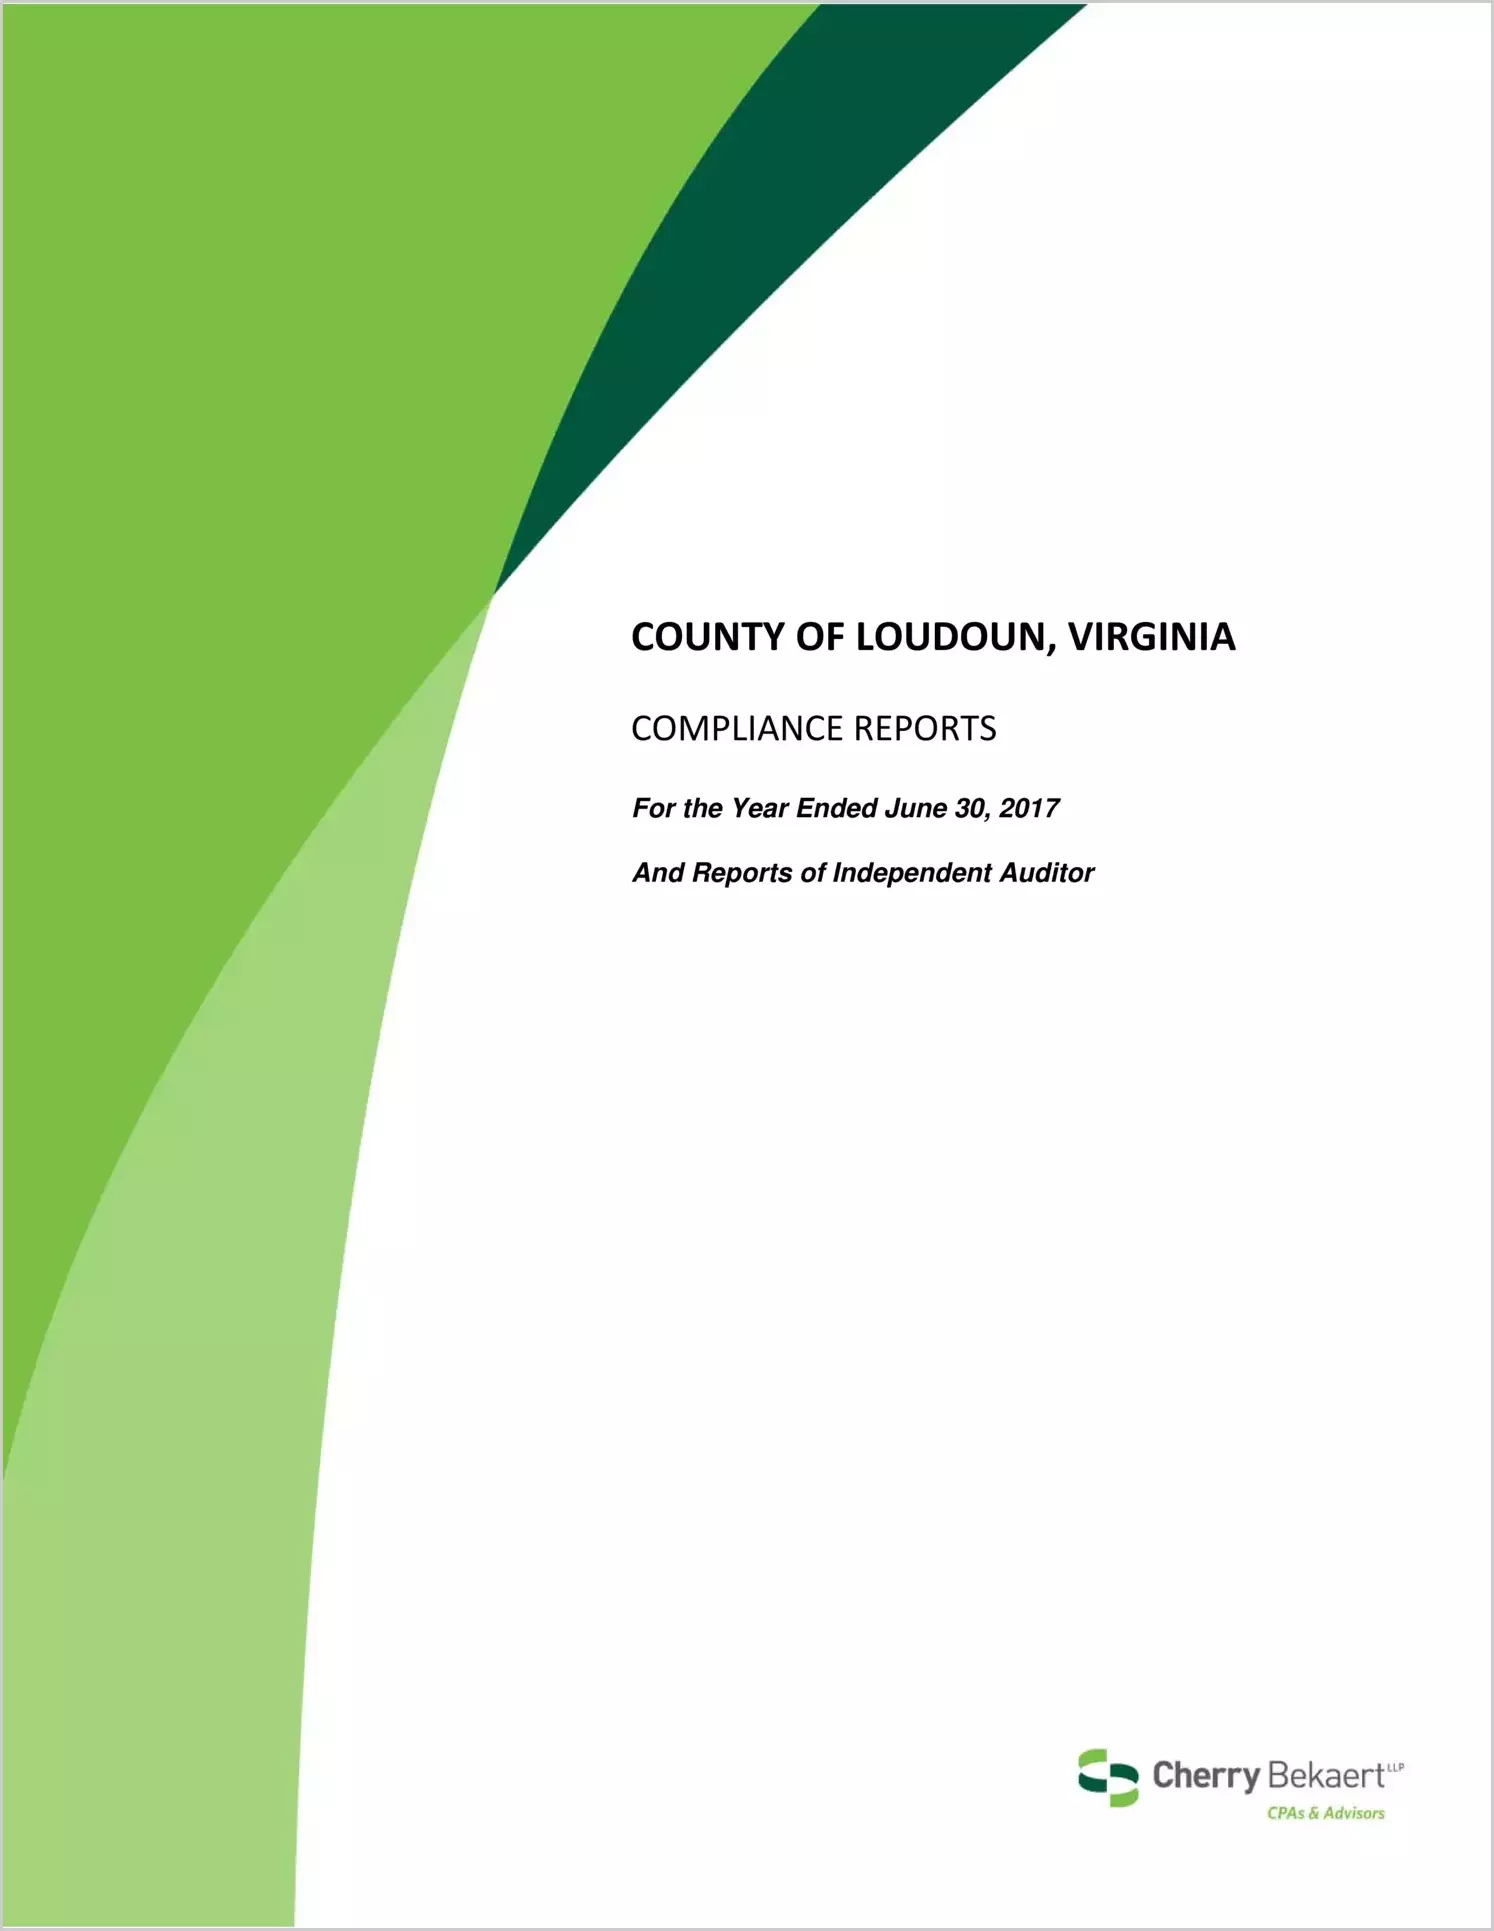 2017 Internal Control and Compliance Report for County of Loudoun